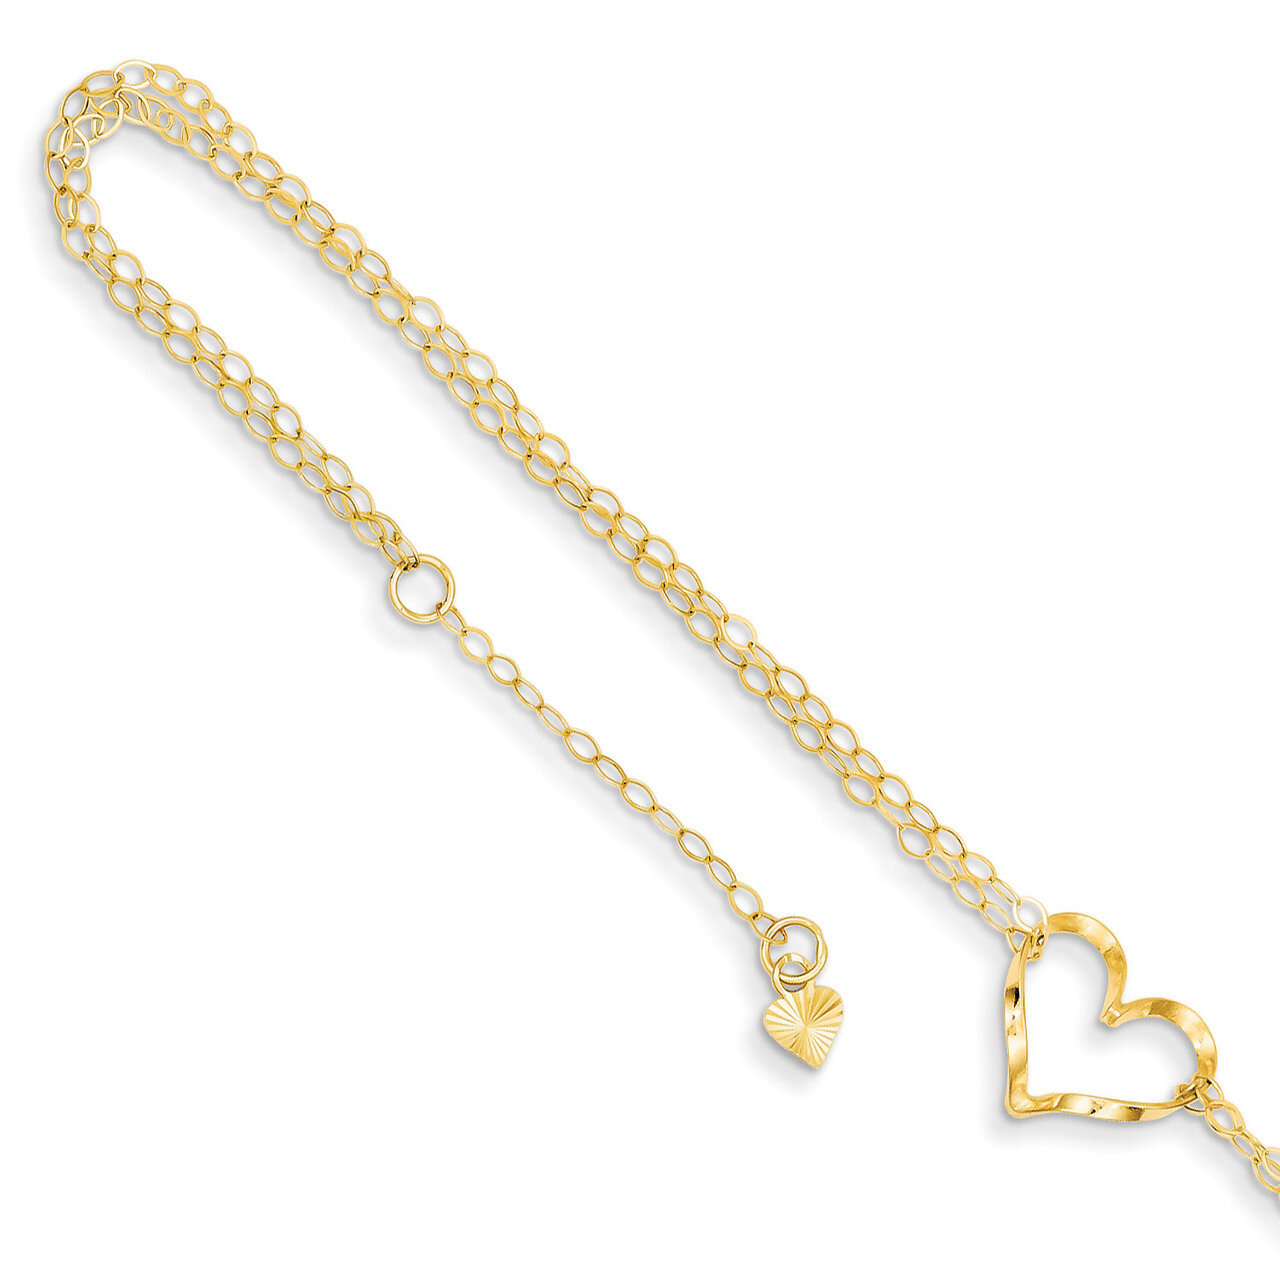 Double Strand Heart Anklet 9 Inch 14k Gold ANK173-9